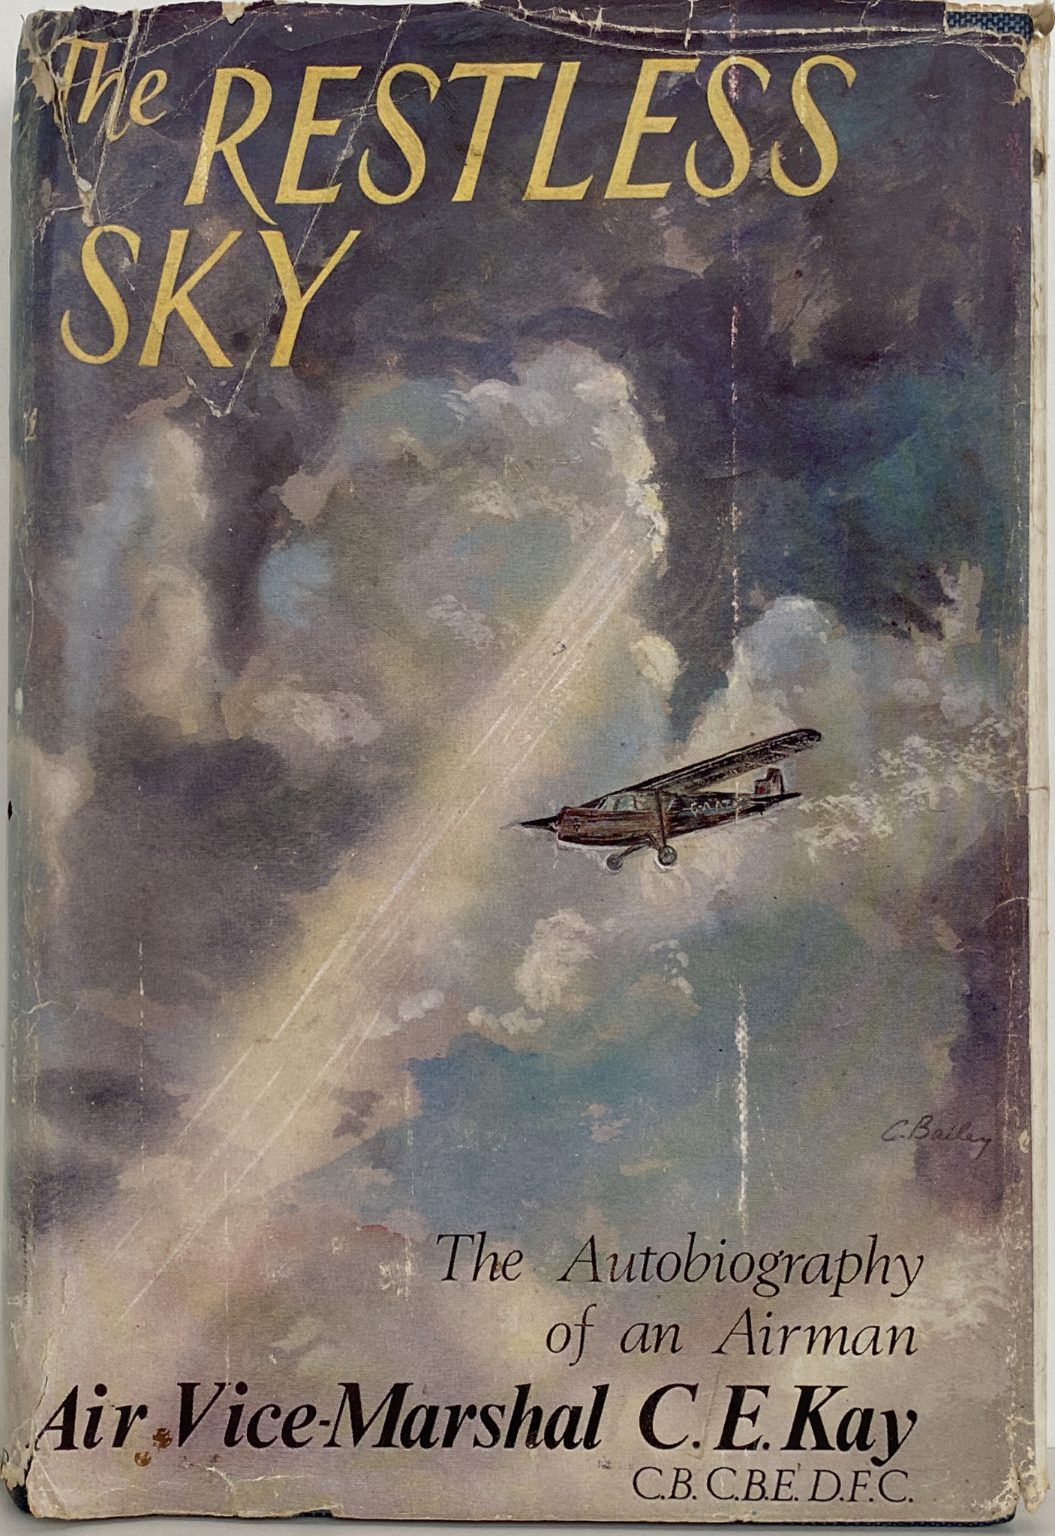 THE RESTLESS SKY: The Autobiography of an Airman